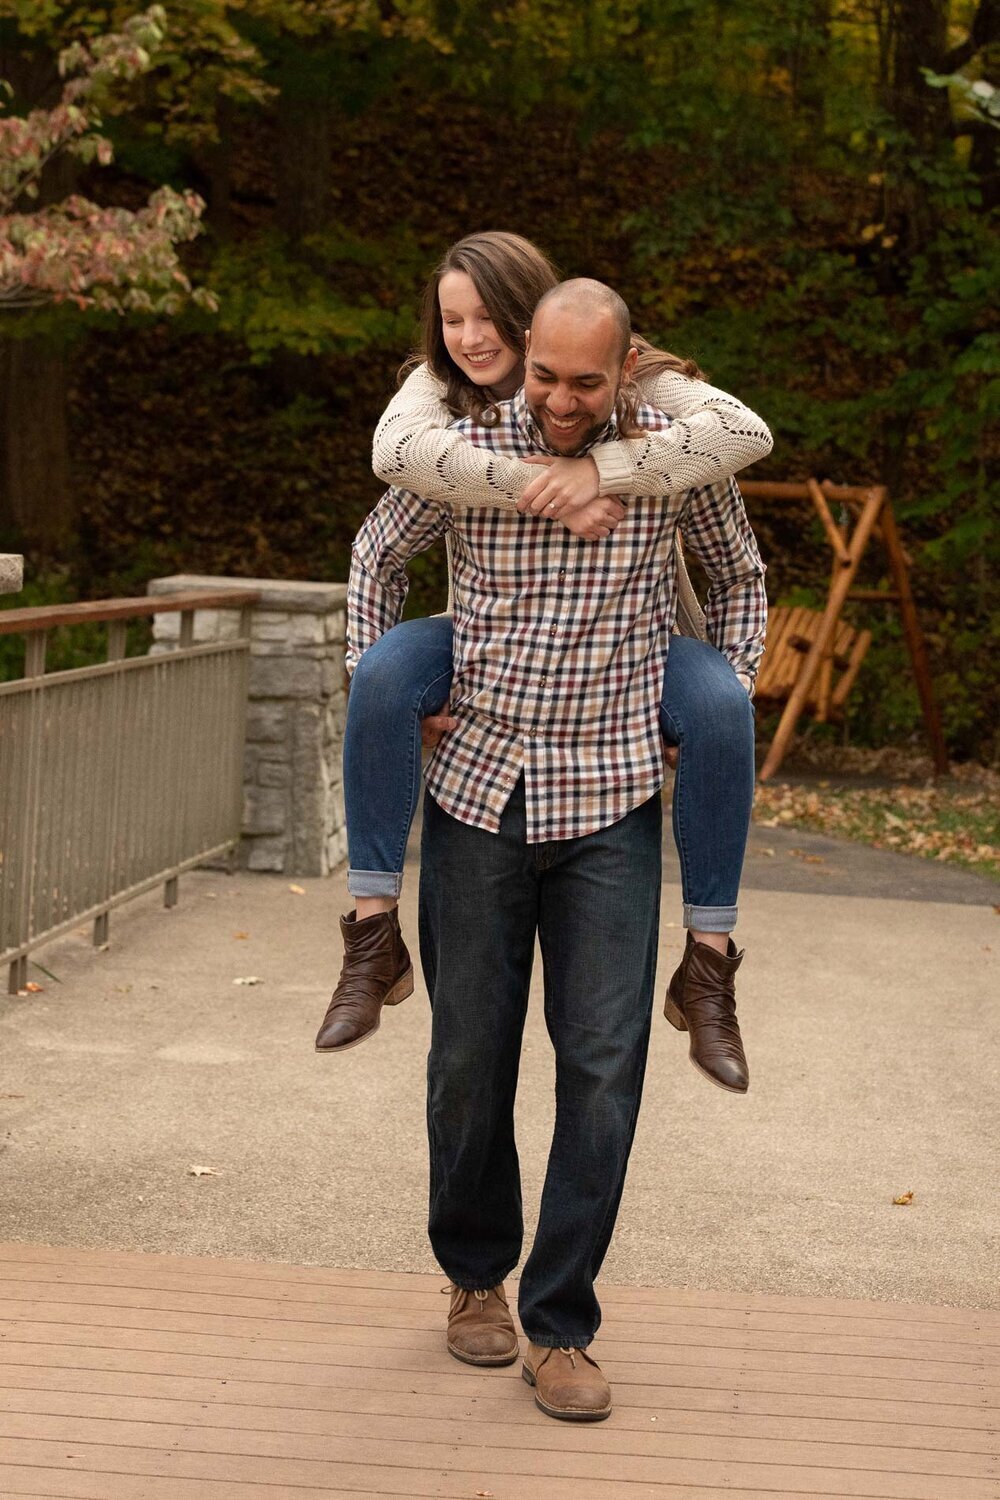 hills-and-dales-metropark-engagement-session-photos--3